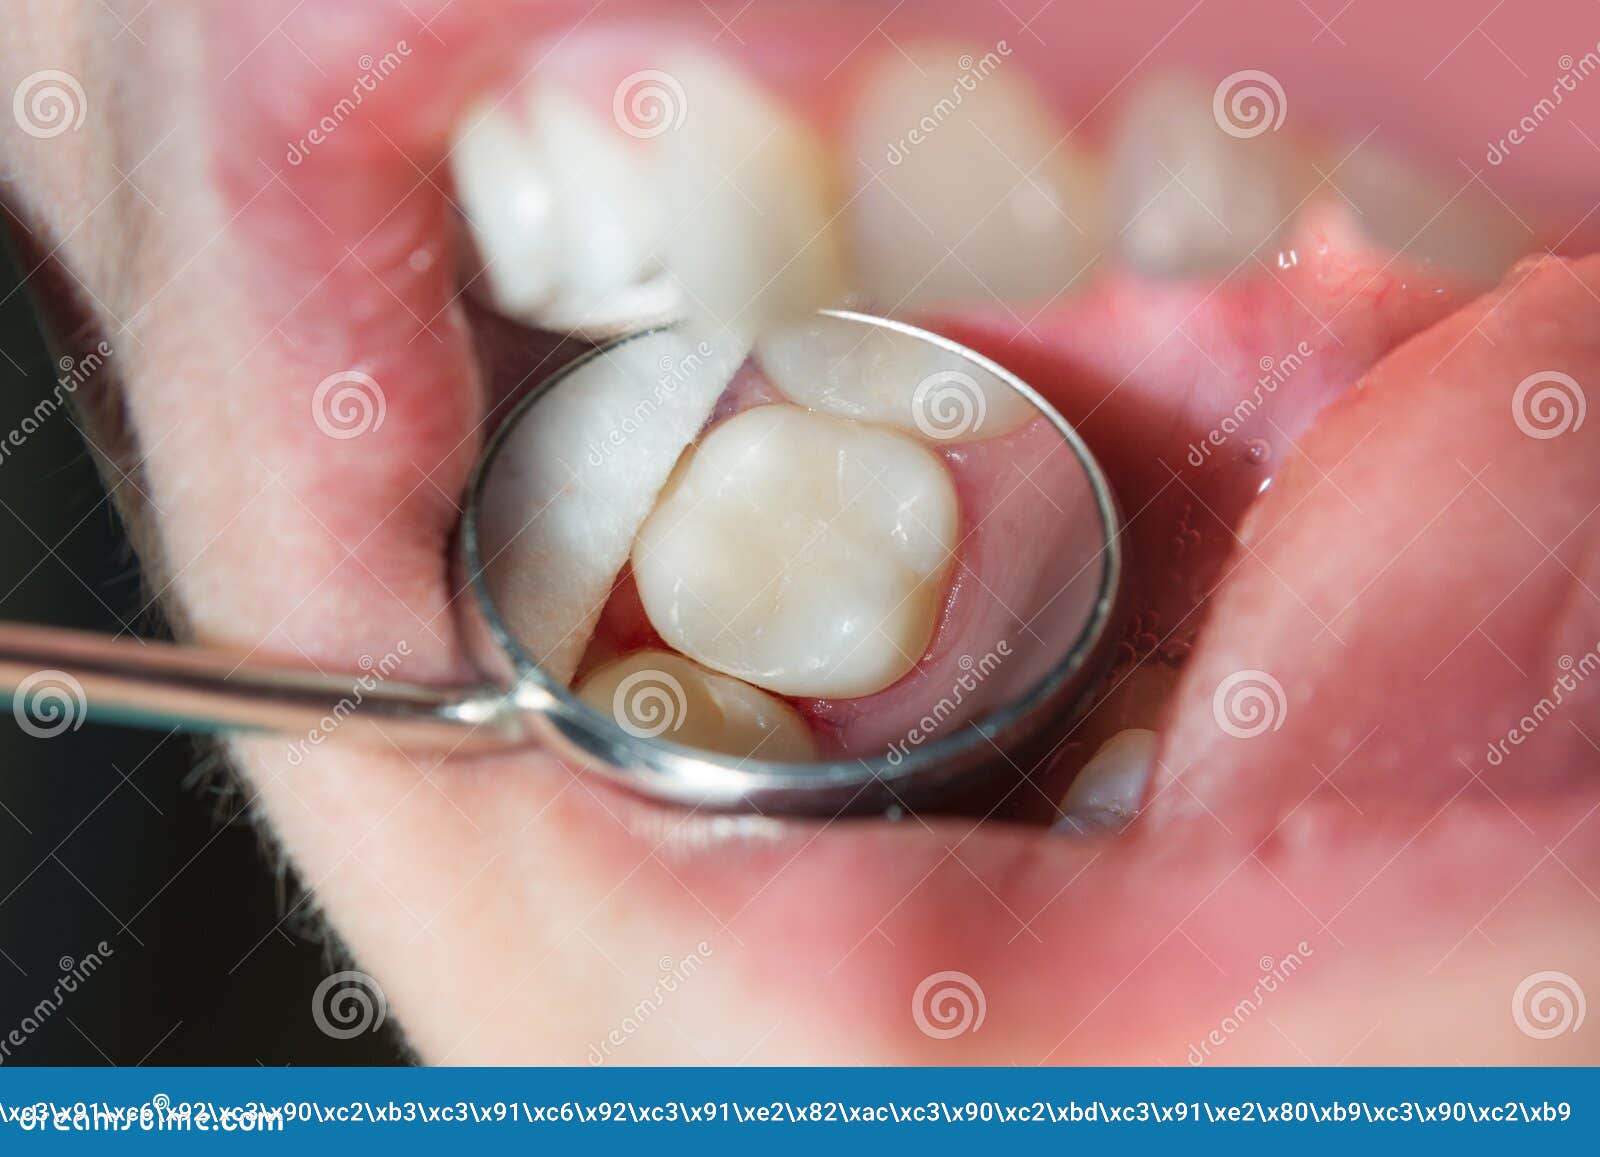 close-up of a human rotten carious tooth at the treatment stage